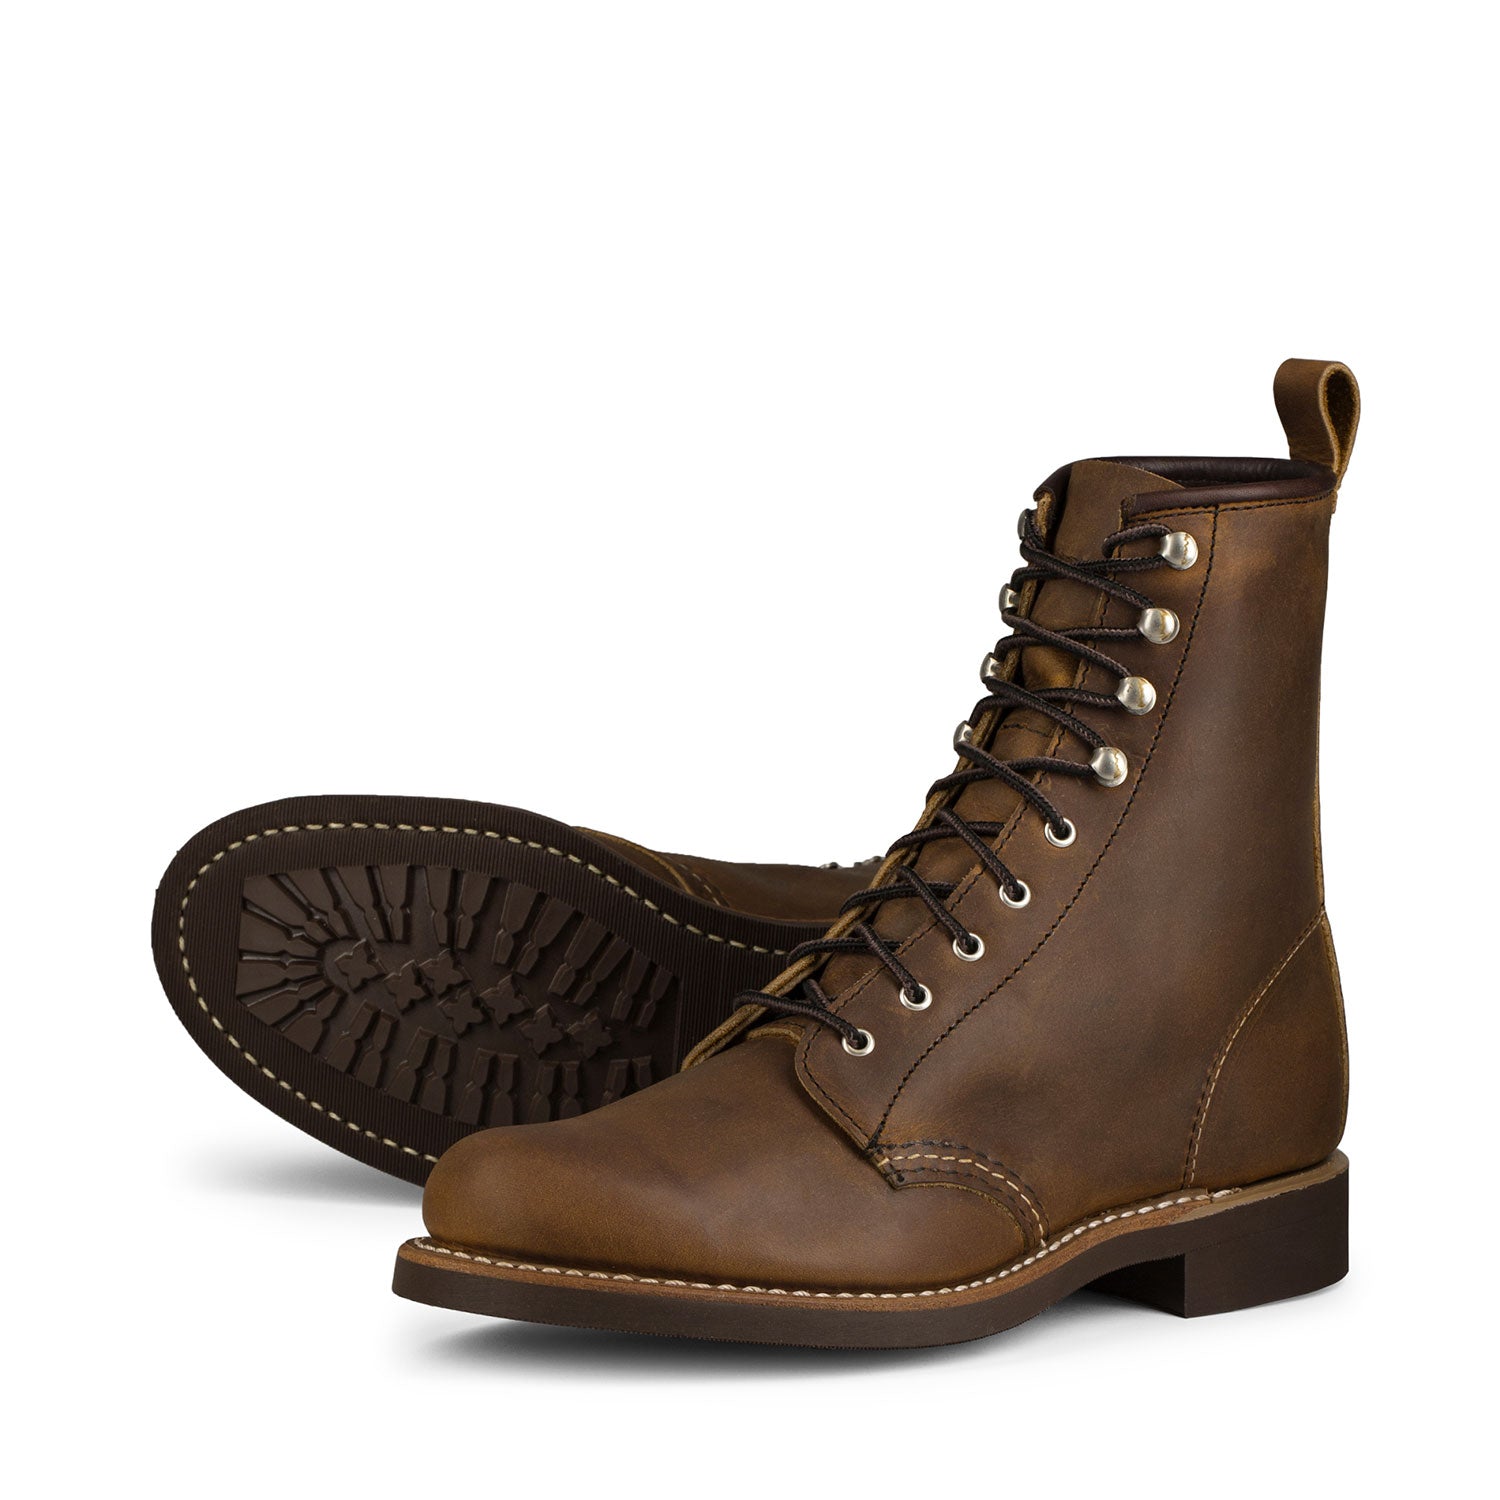 Red Wing Shoes Women's Silversmith Boots | Altitude Sports